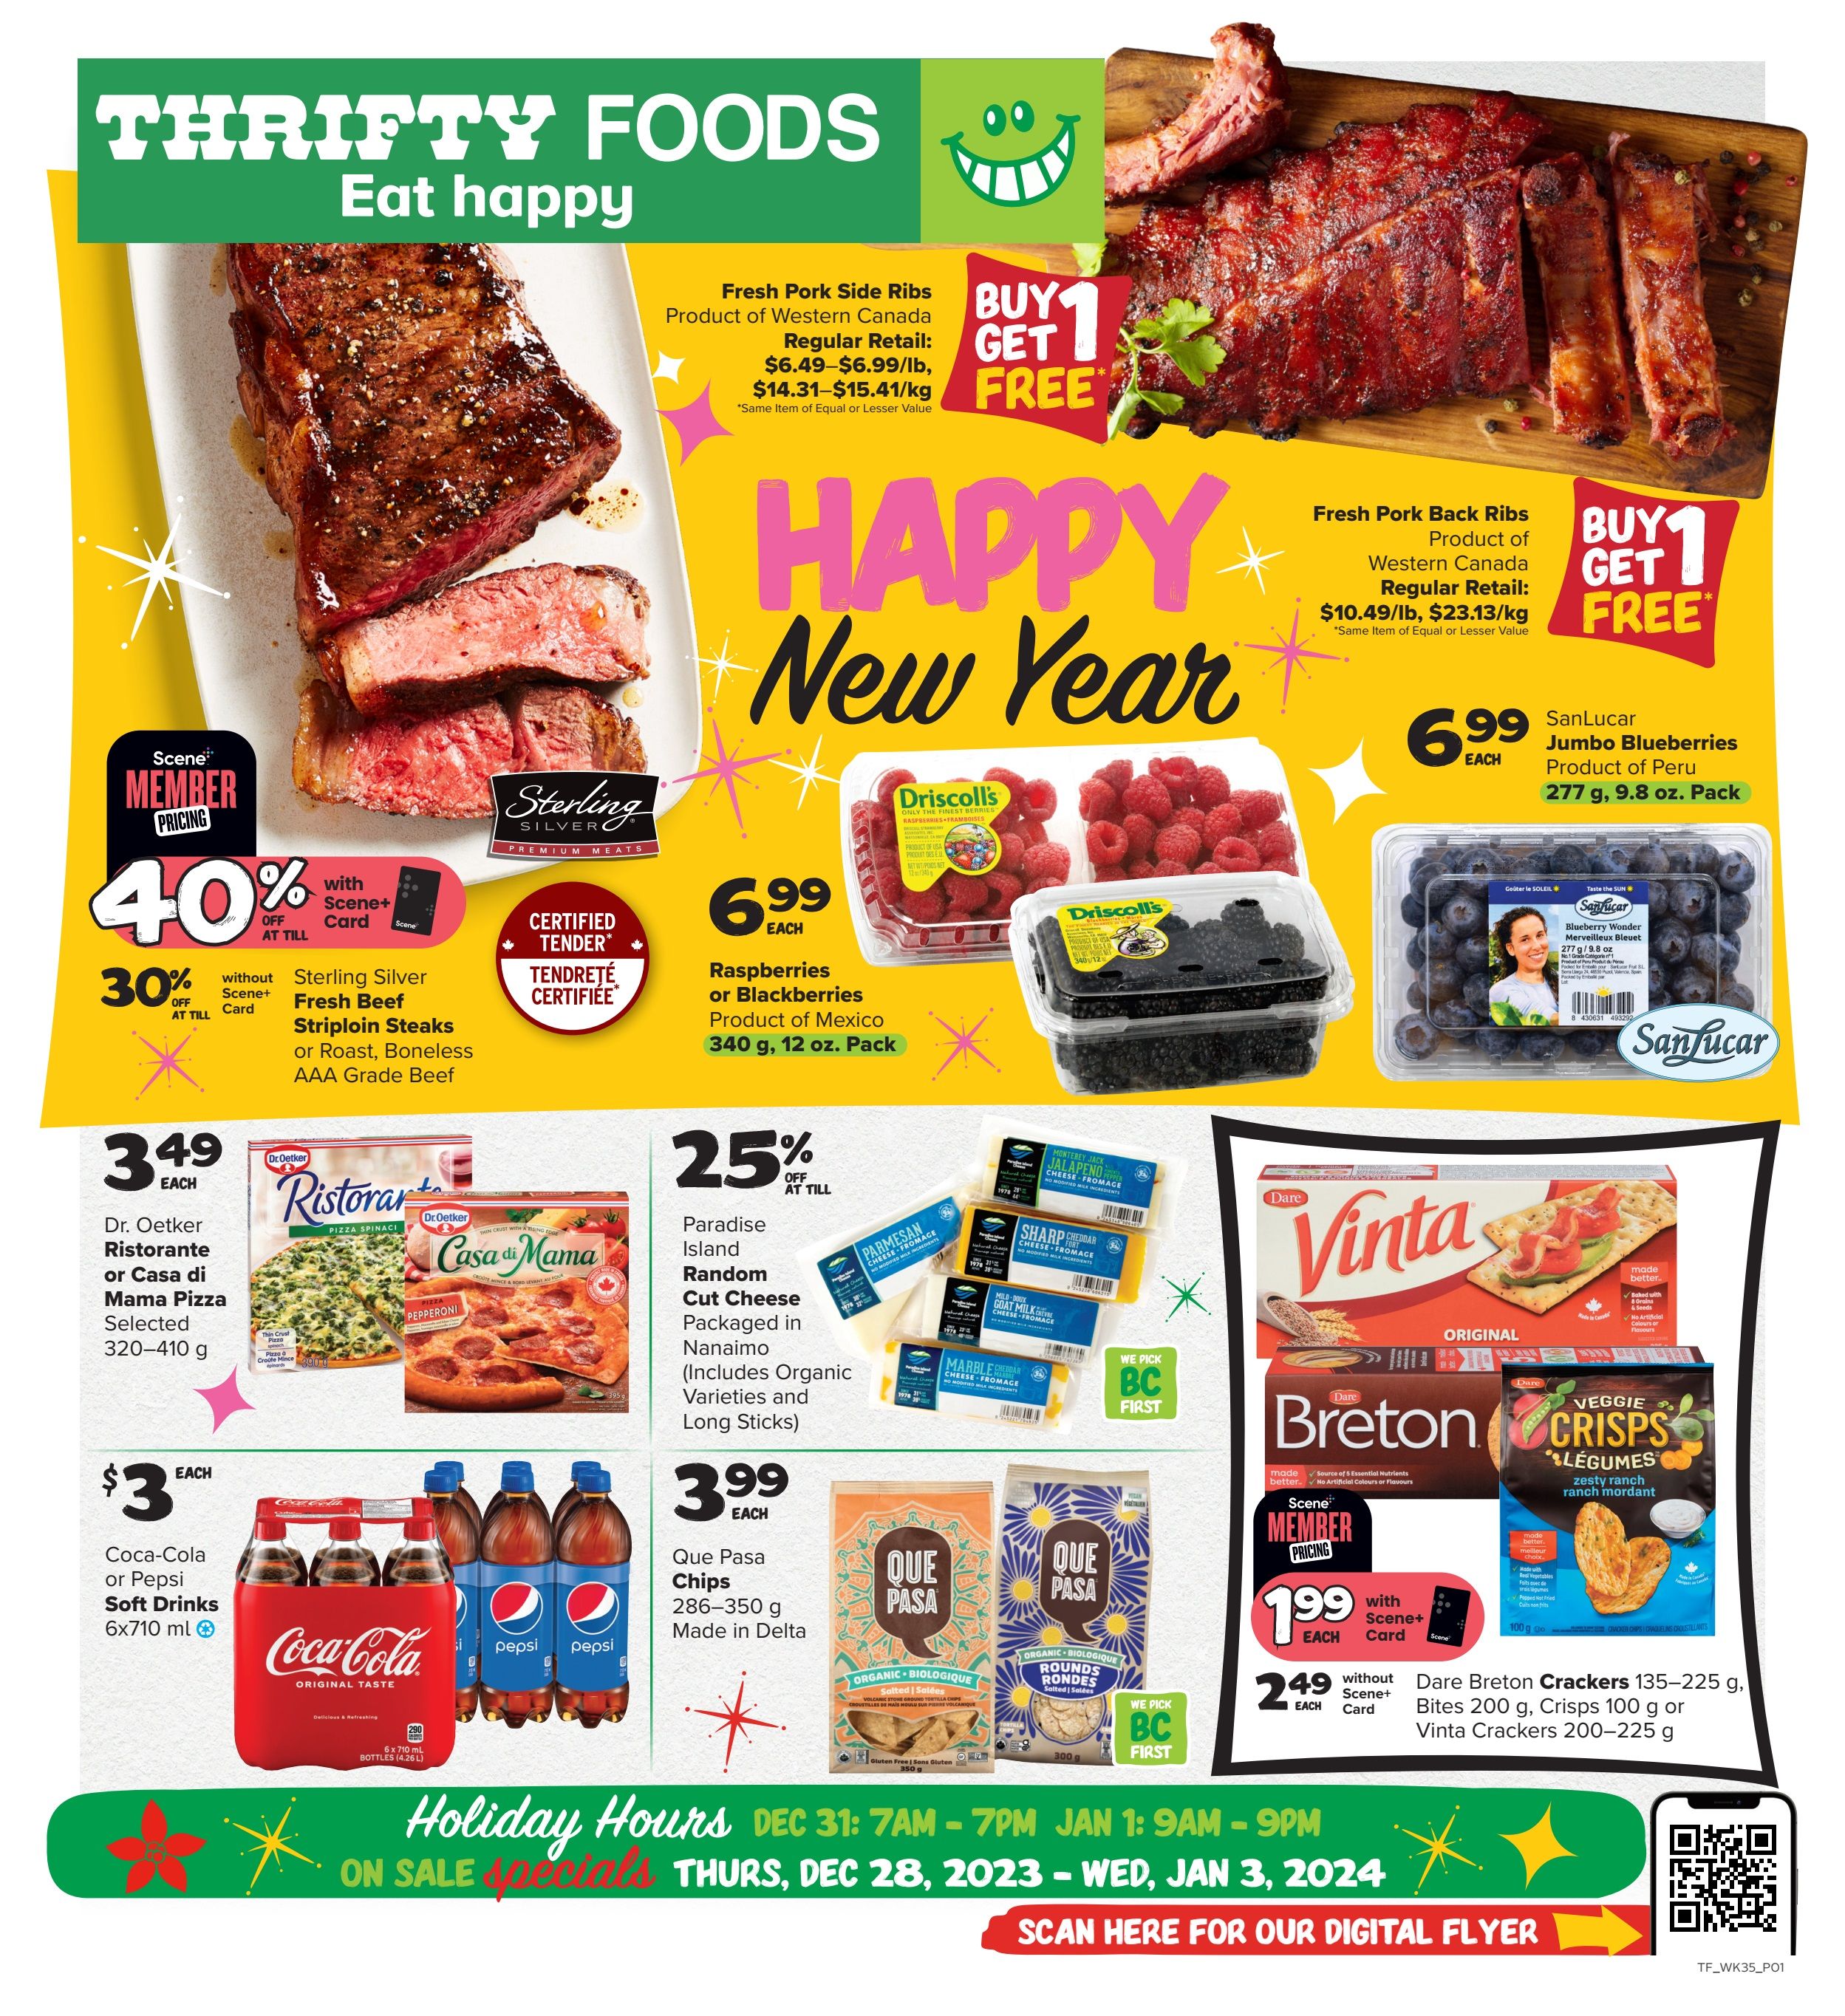 Thrifty Foods Grocery Delivery & Pickup